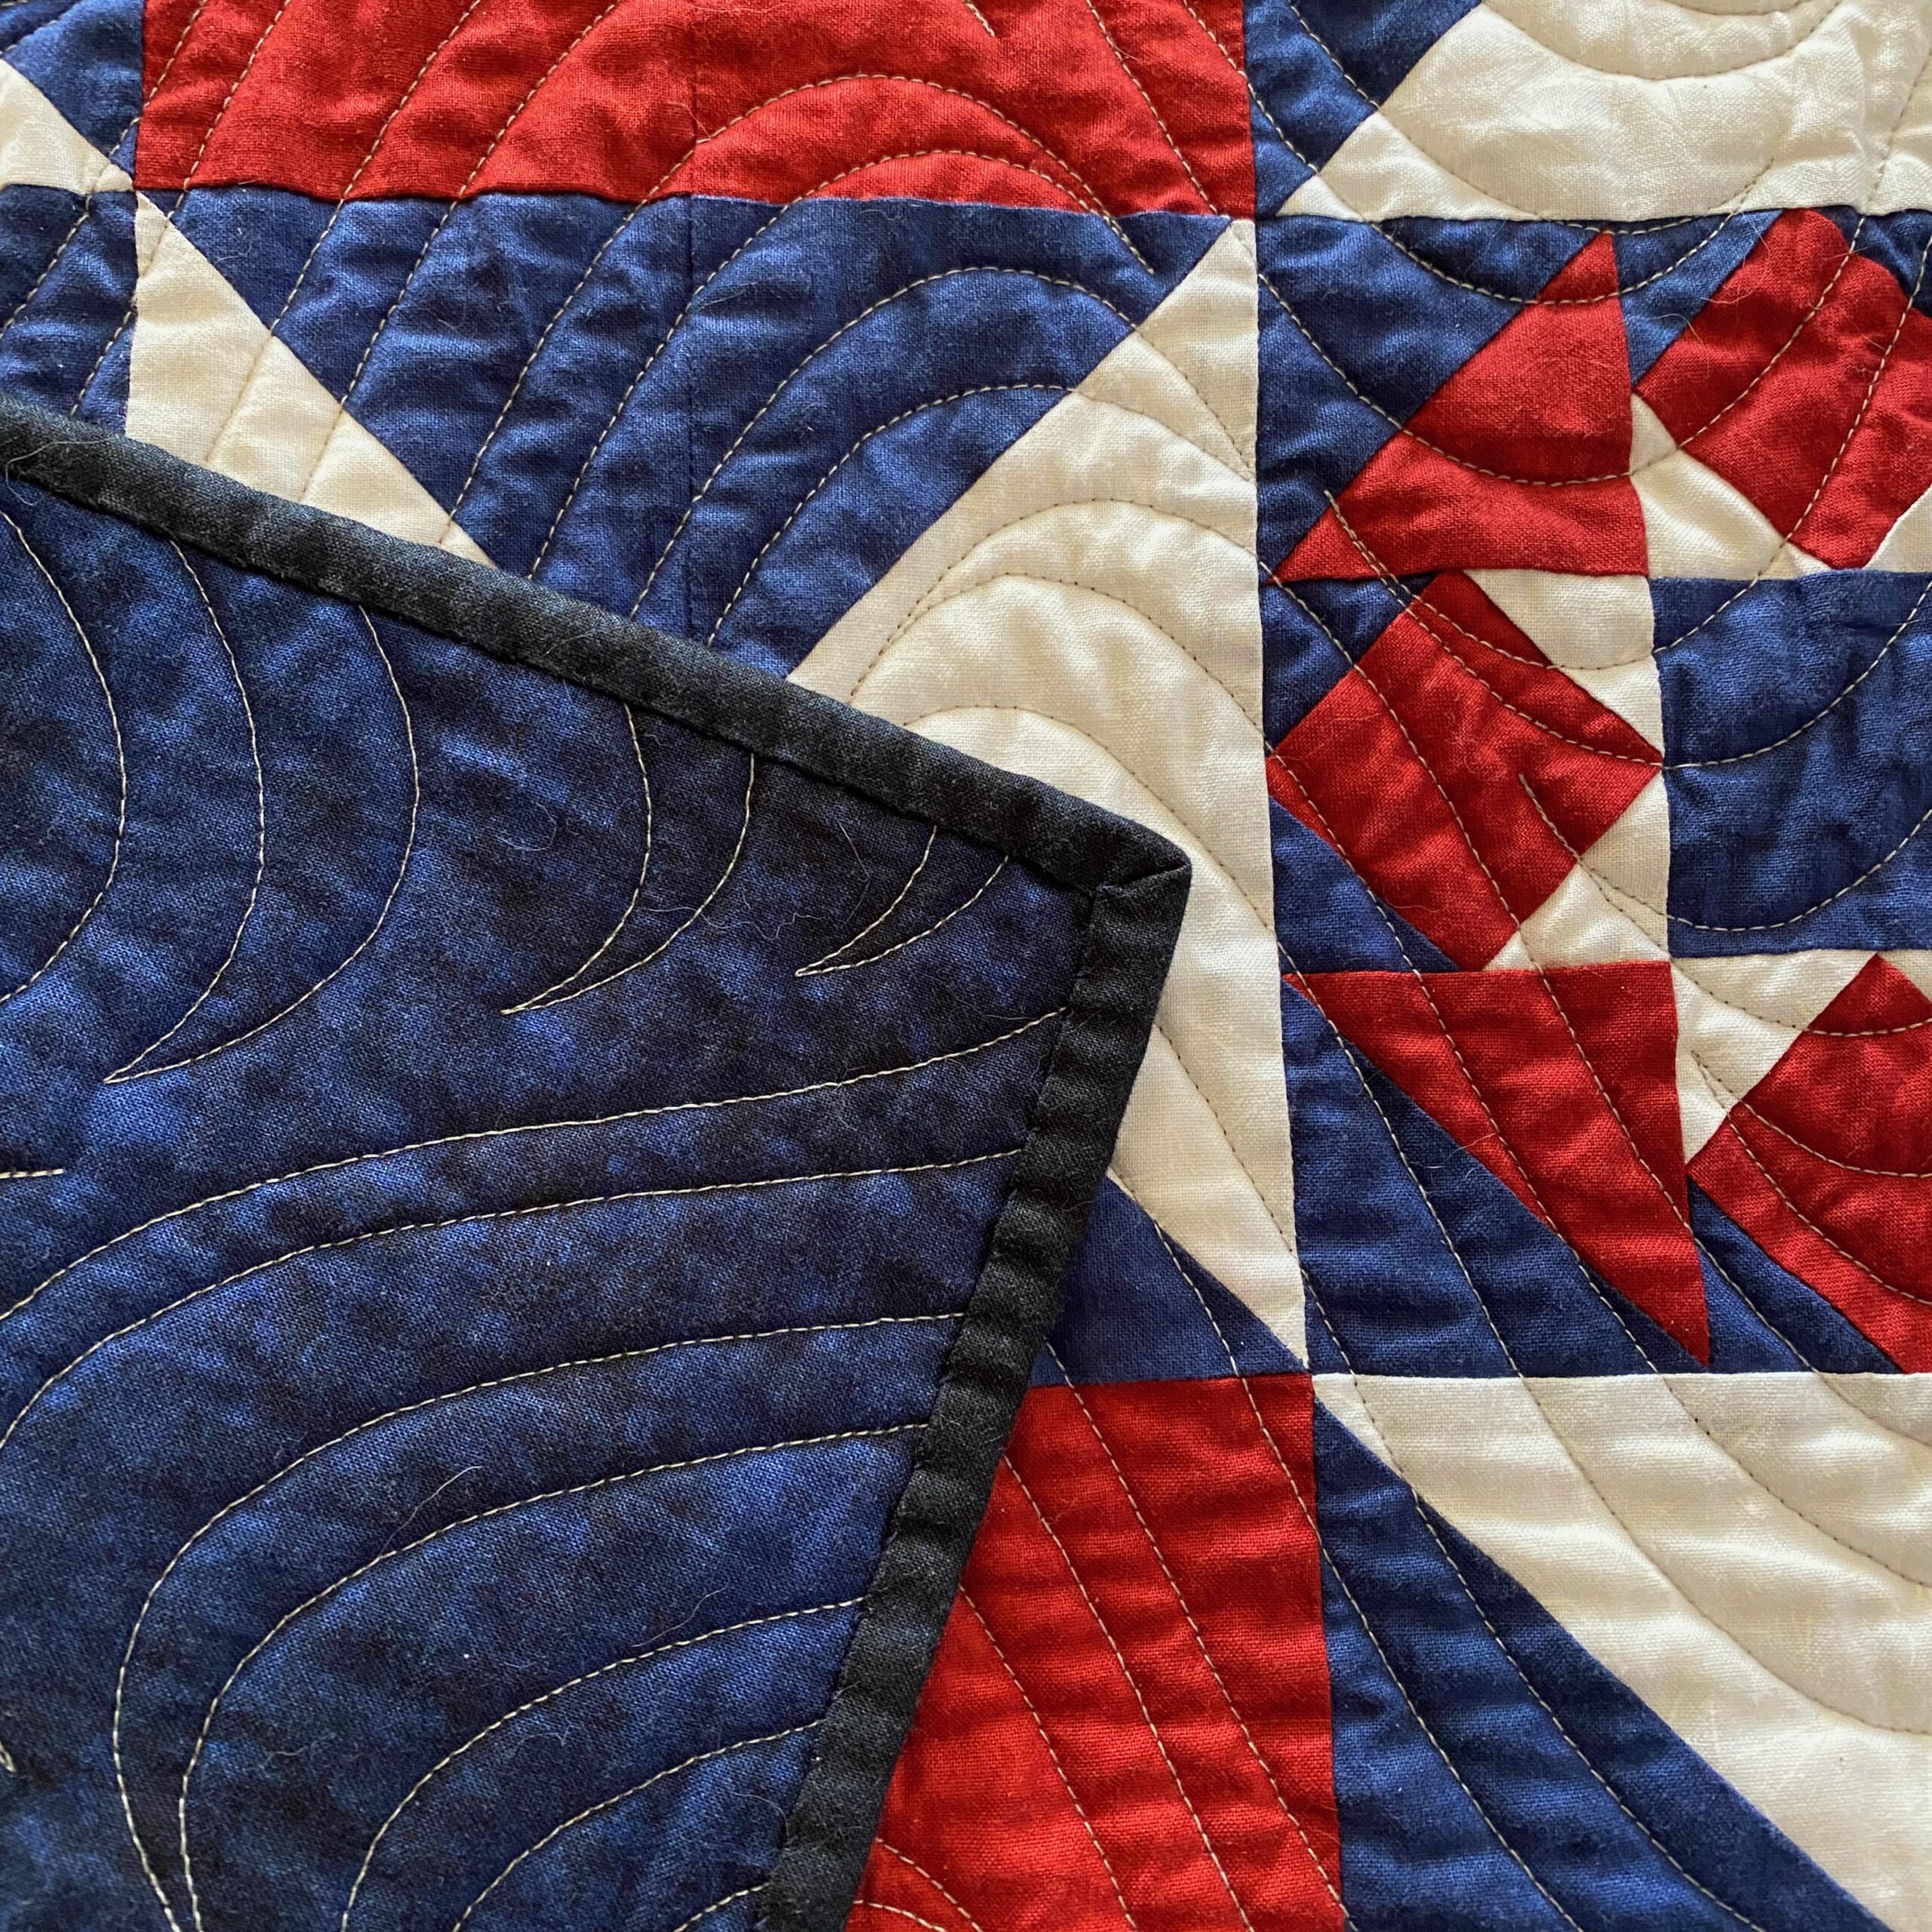 Quilt Binding Methods - finishing the raw edge of our quilts